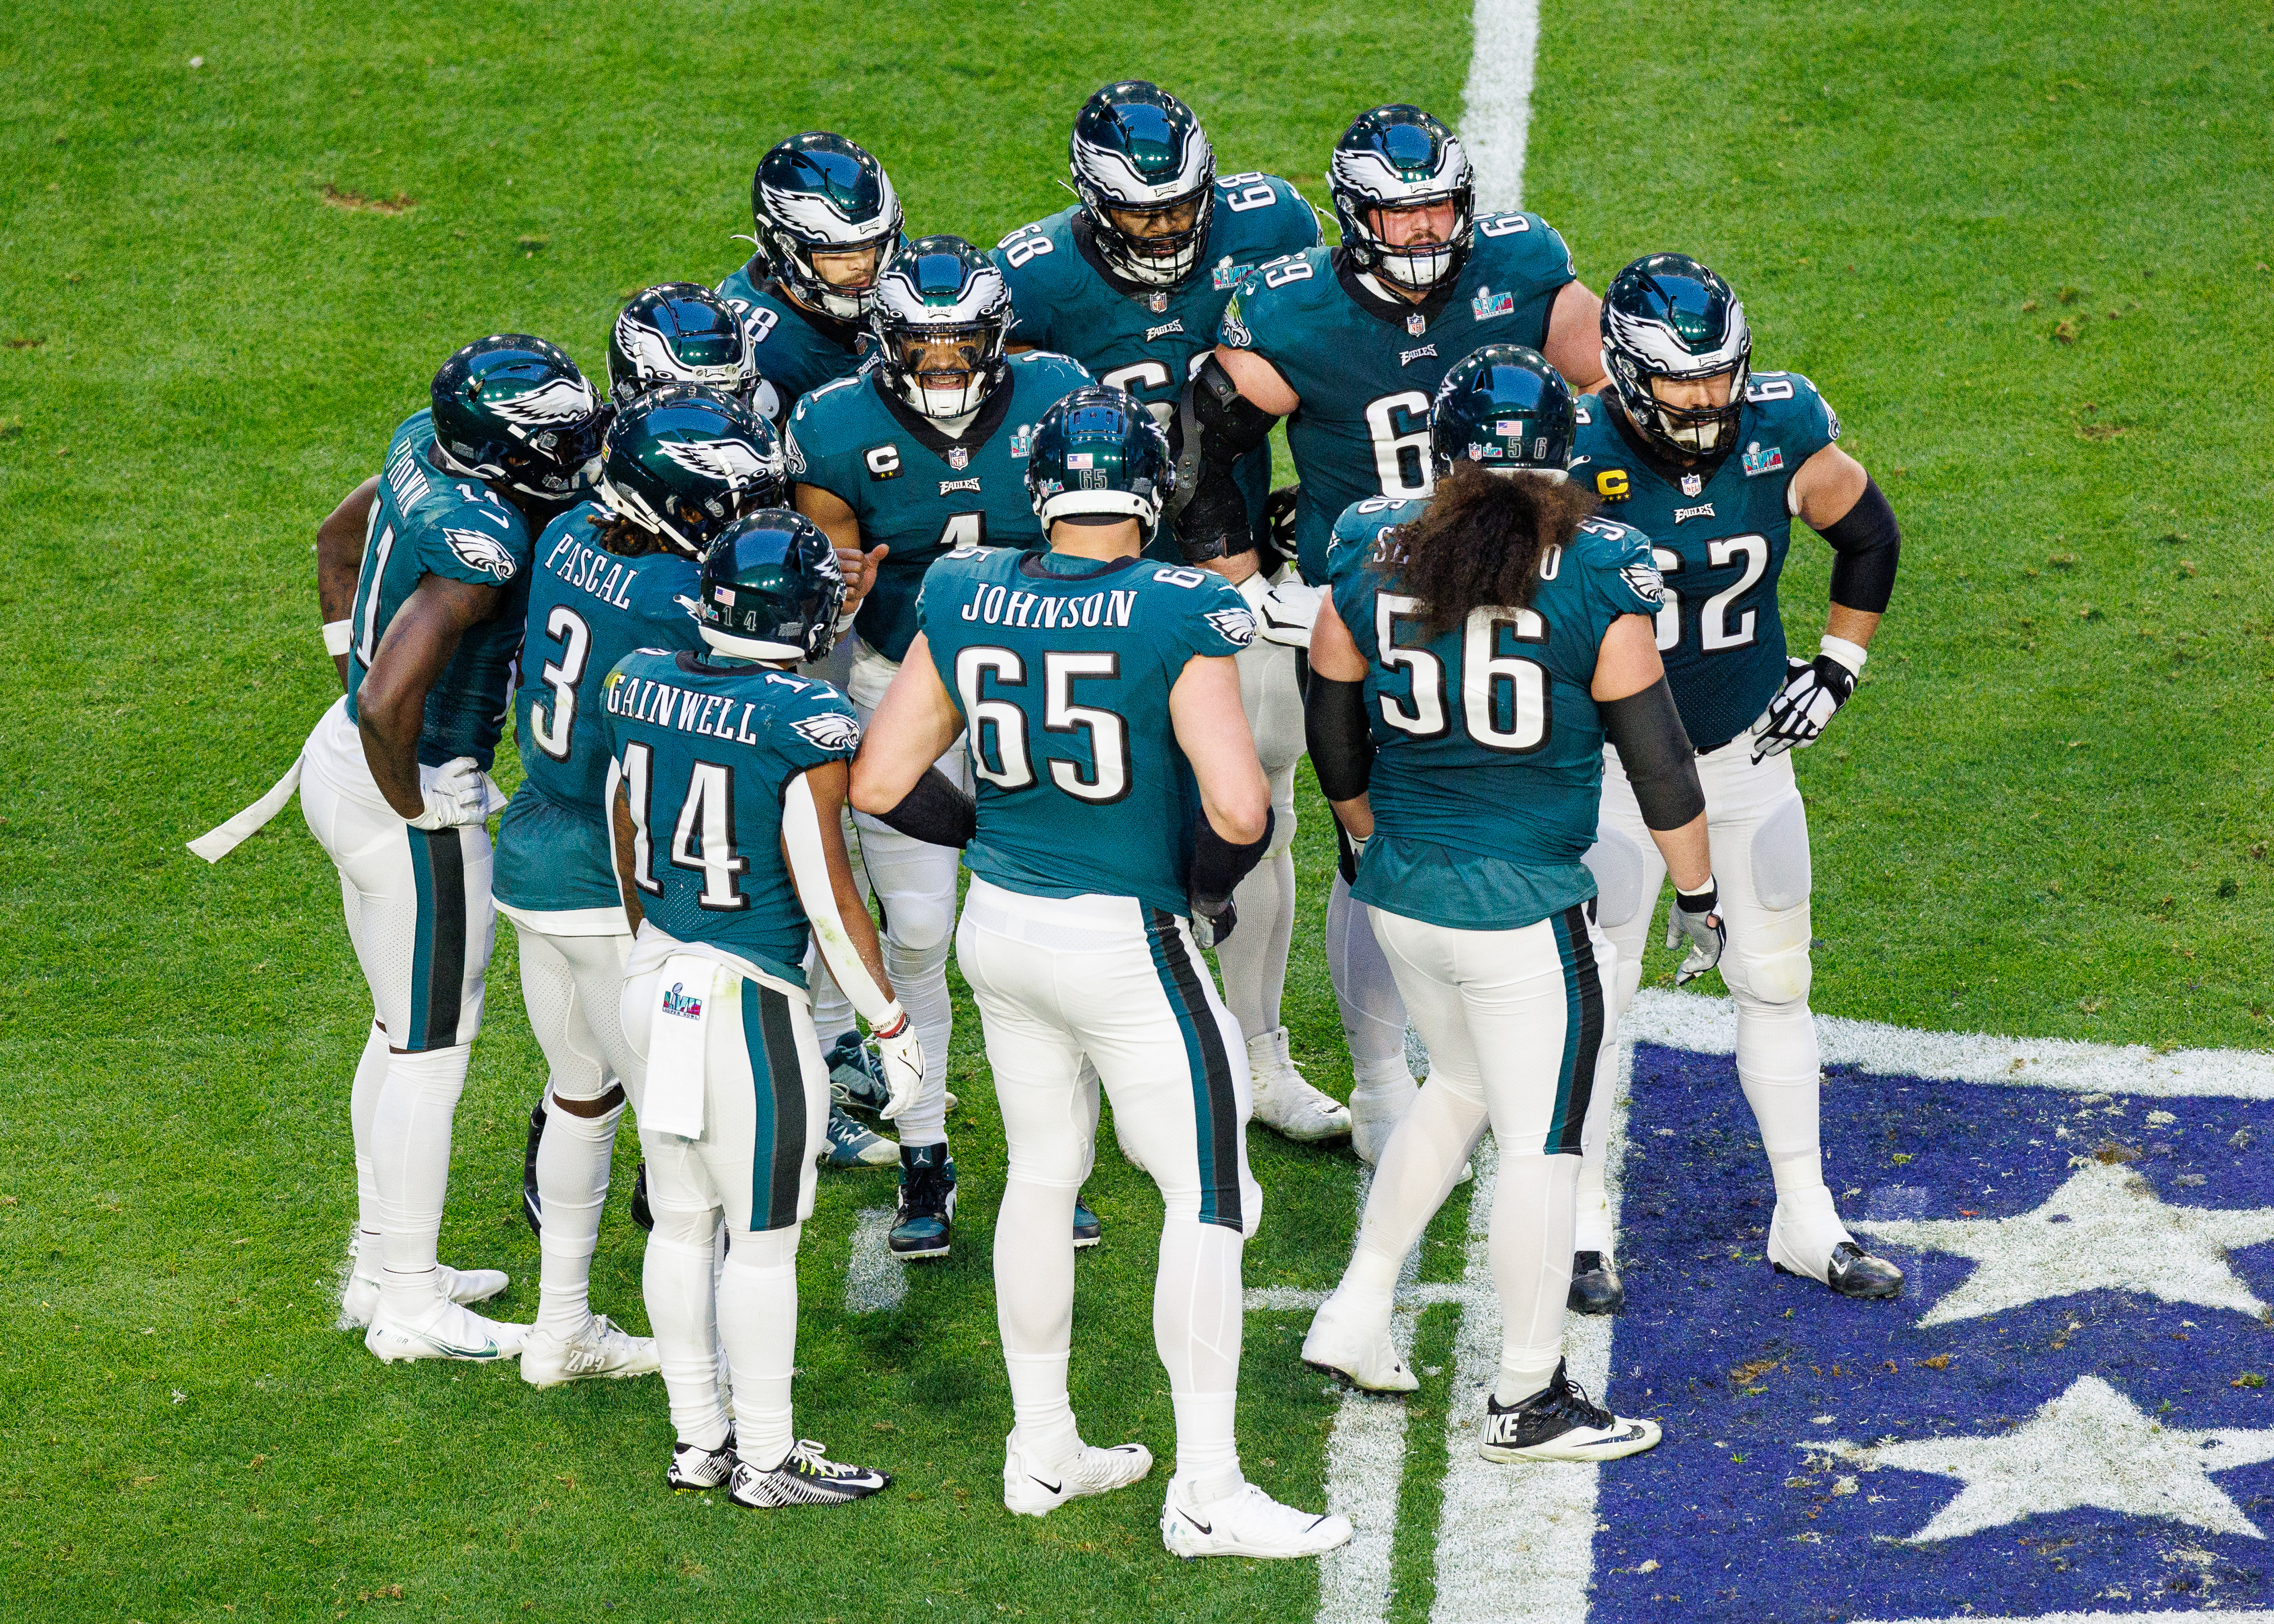 stream eagles game today